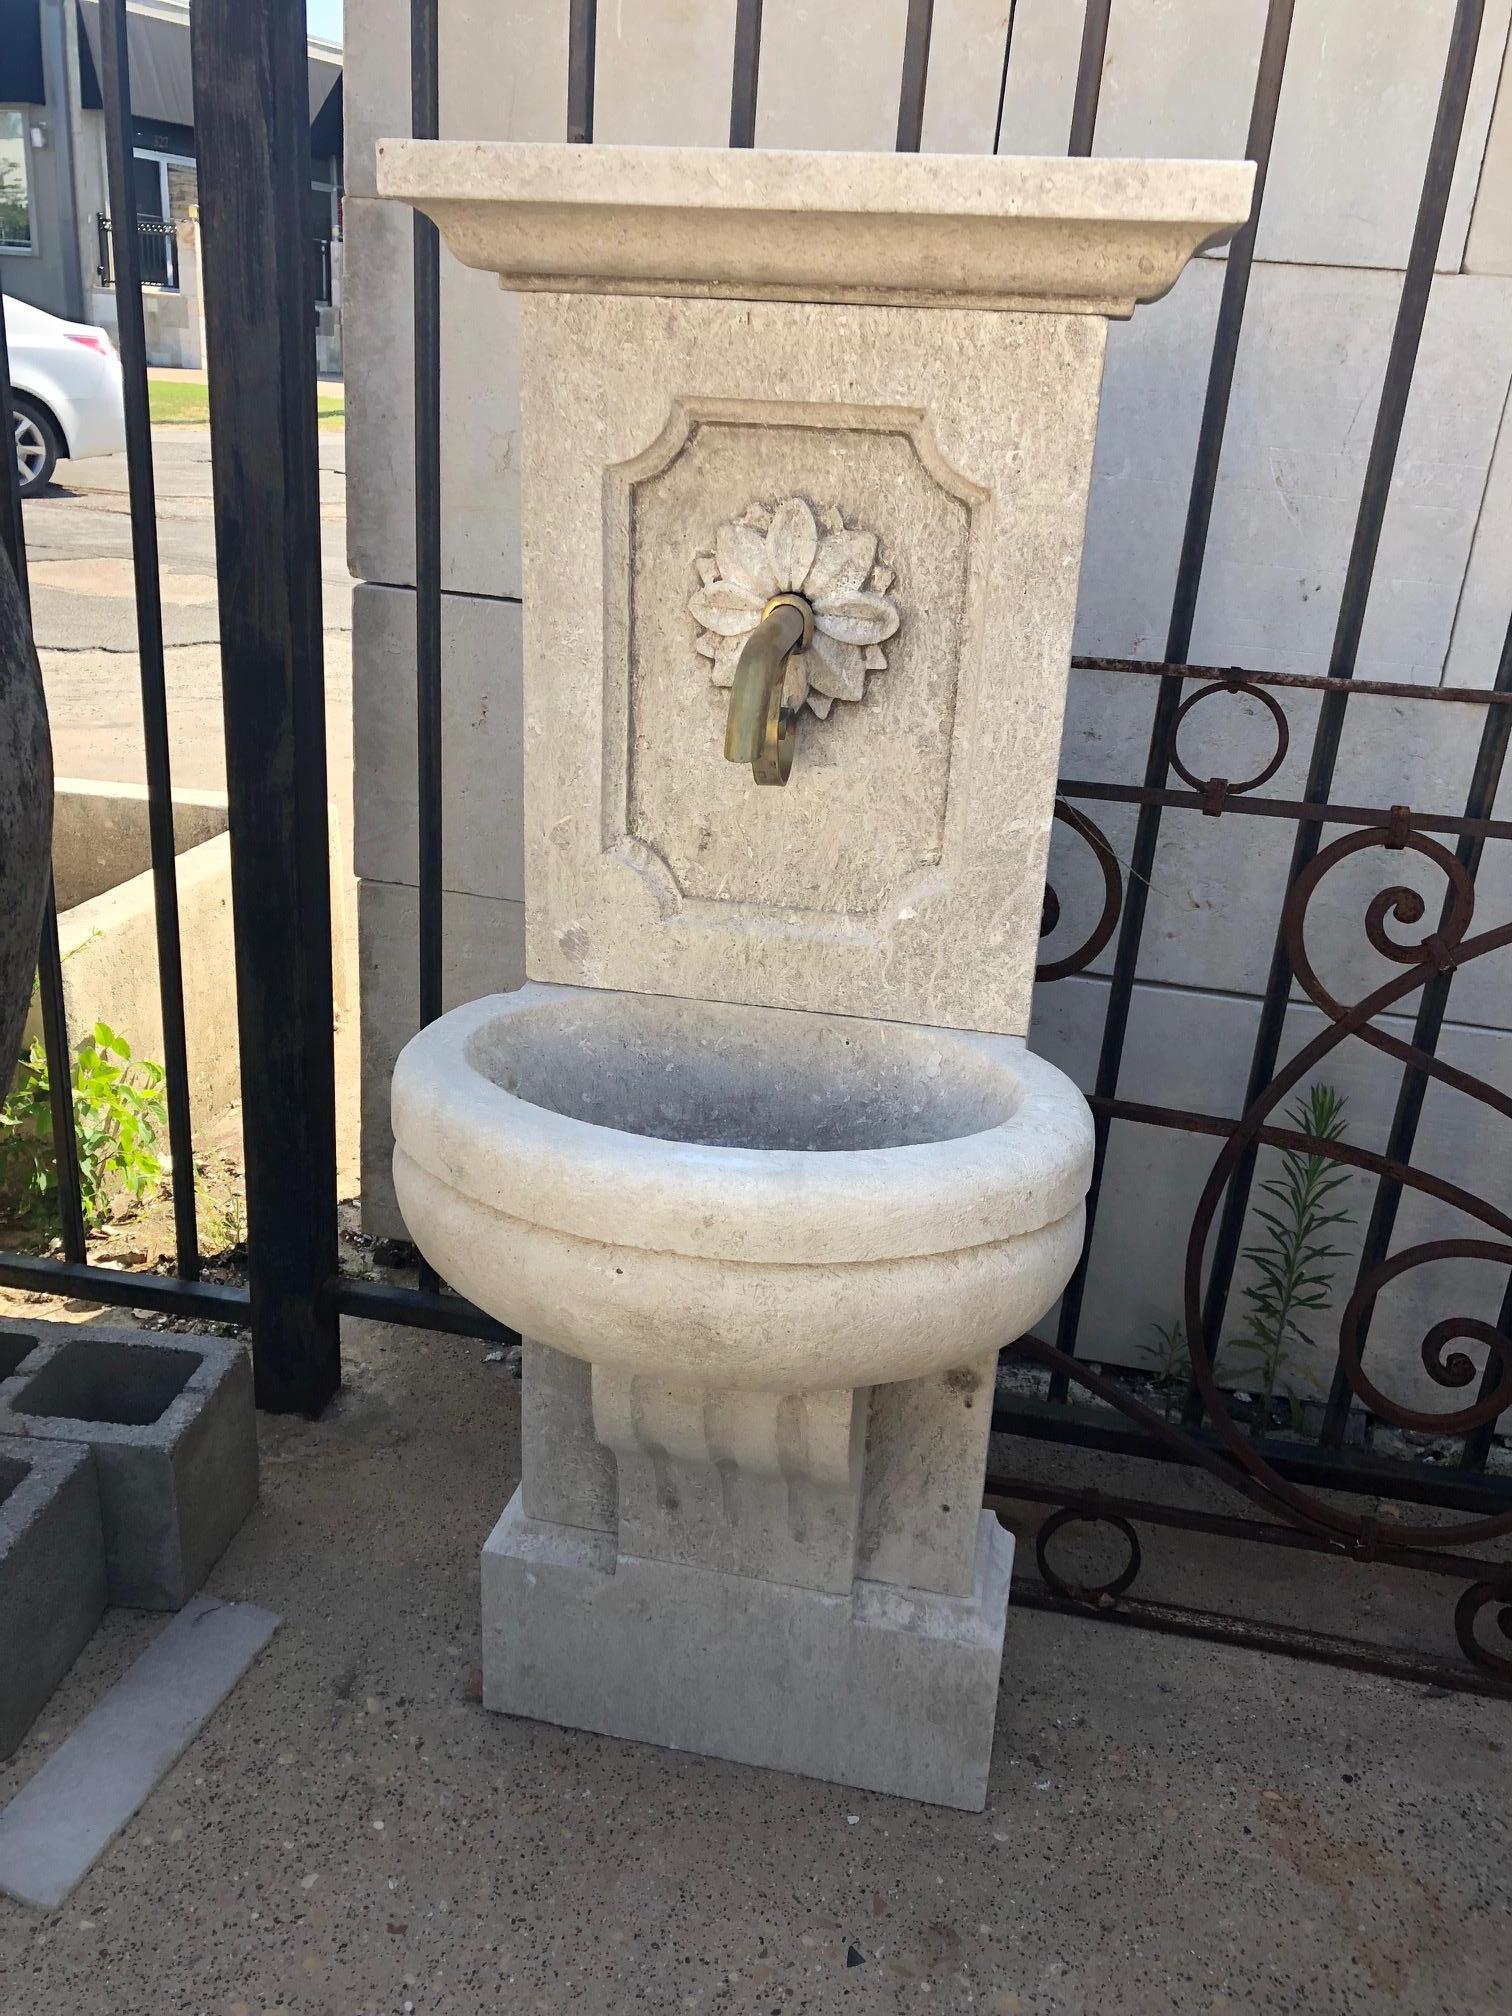 This petite limestone wall fountain was hand-carved in France and features a flower motif as the focal point and flute design on the curved Stand.

Origin: France

Measurements: 4'4